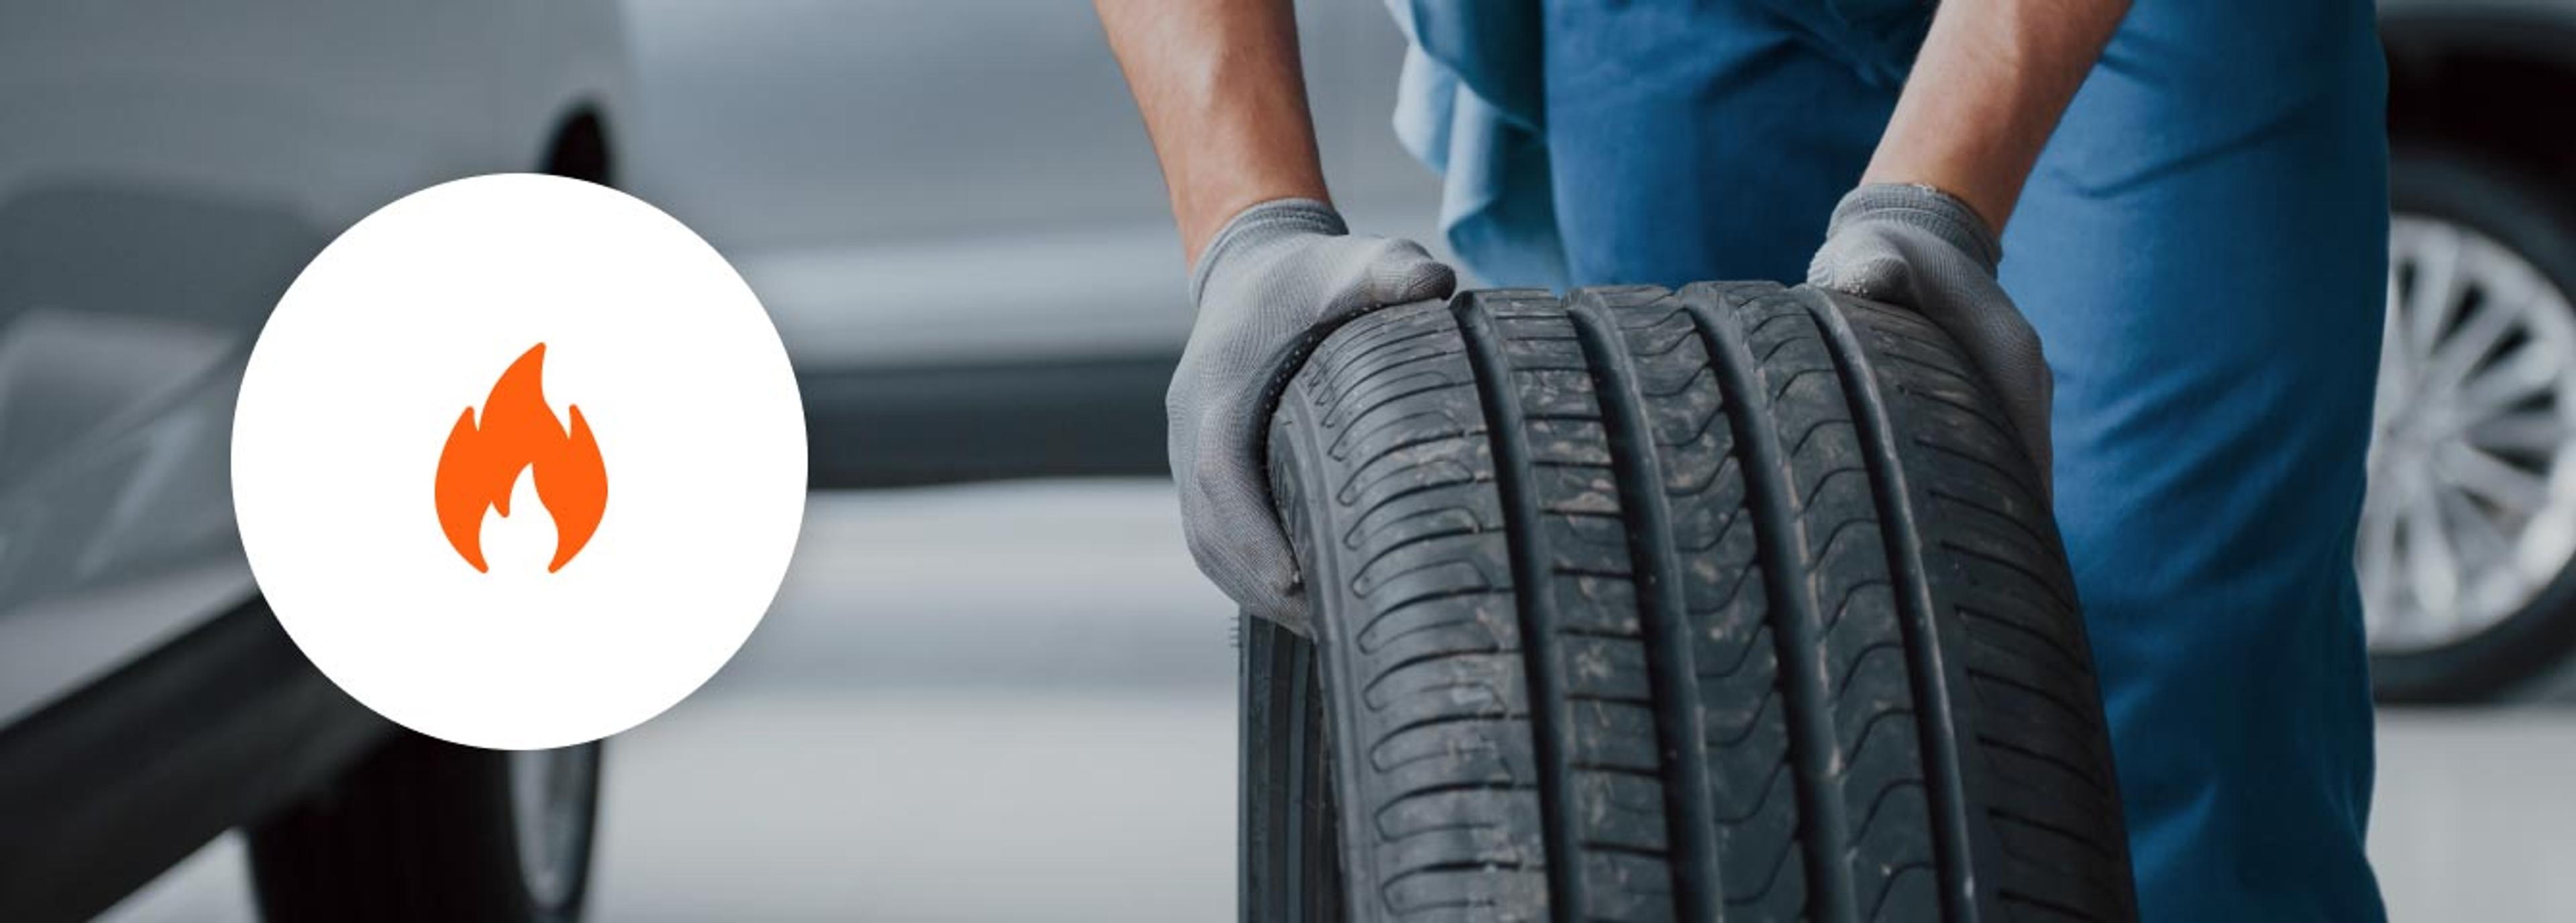 Save up to 30% on Federal tires today